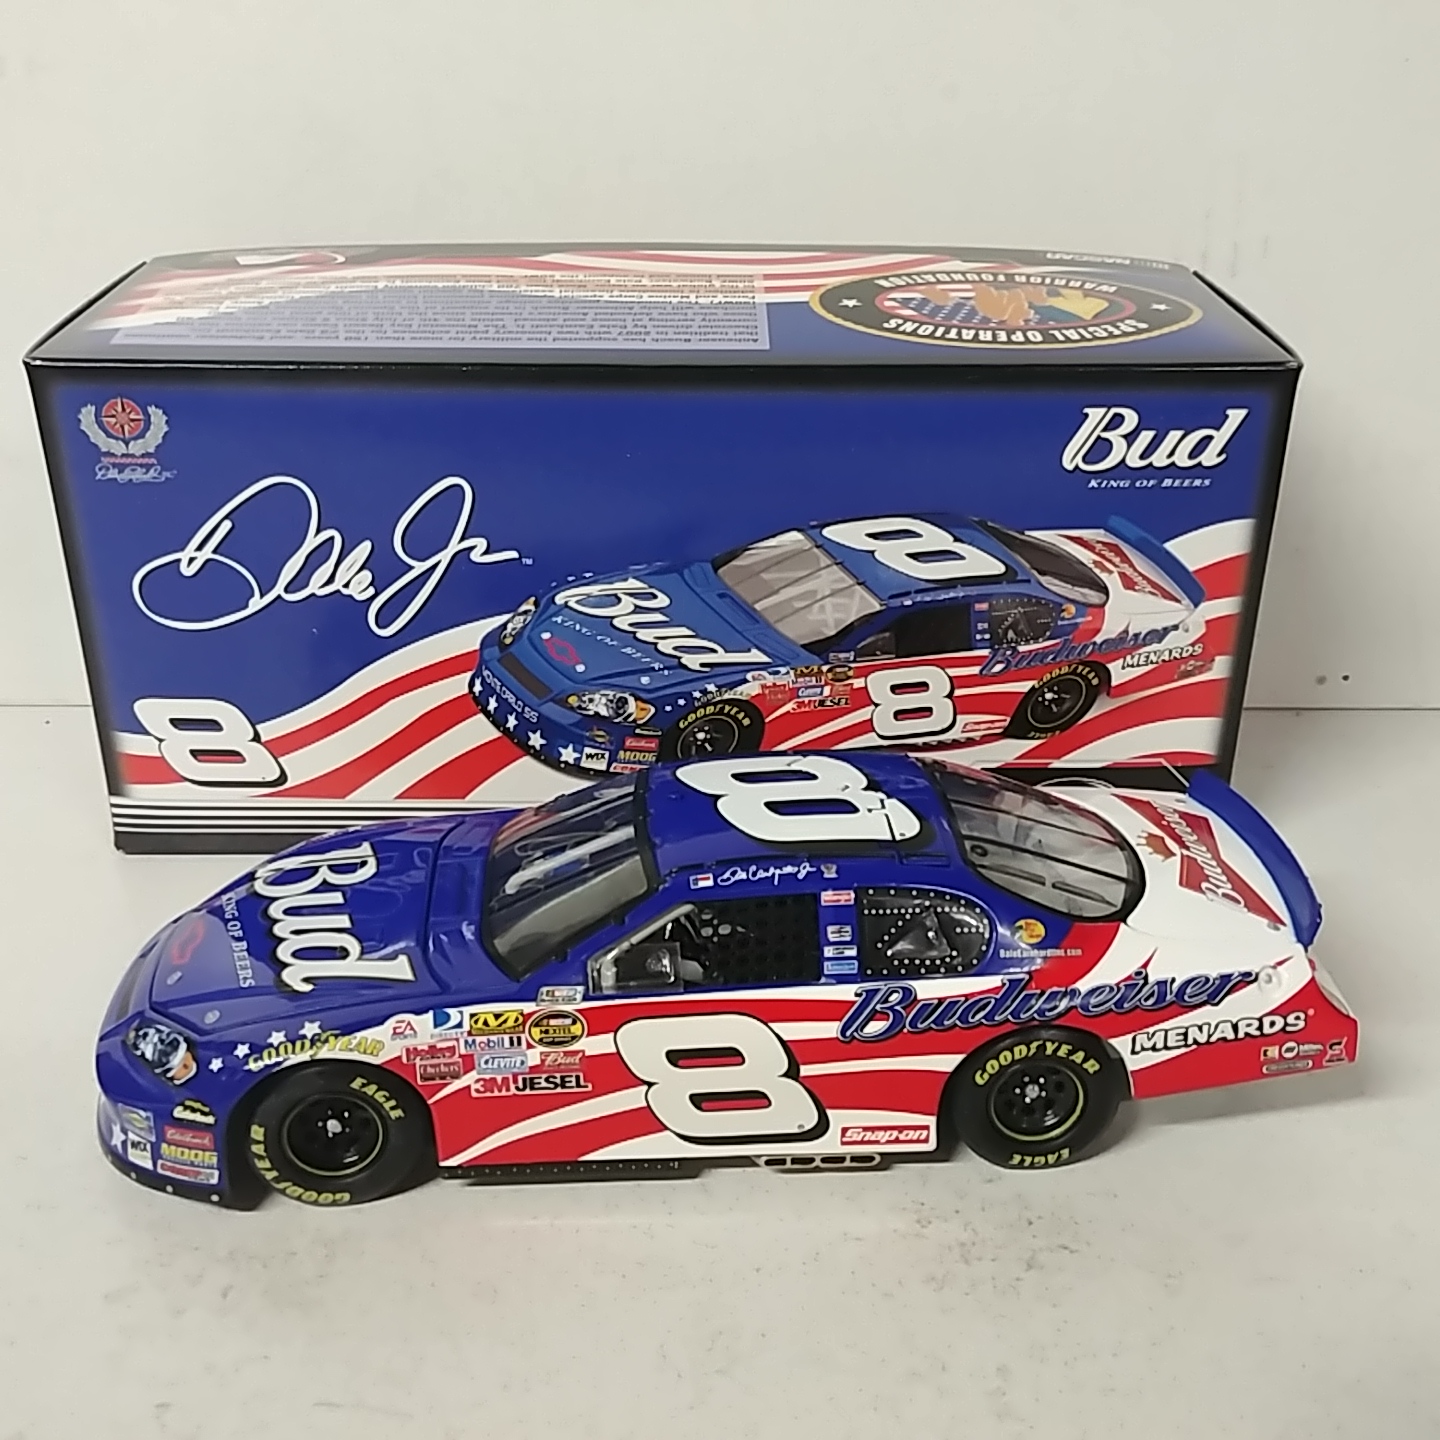 2007 Dale Earnhardt Jr 1/24th Budweiser "Fourth of July" "Stars & Stripes" Monte Carlo SS